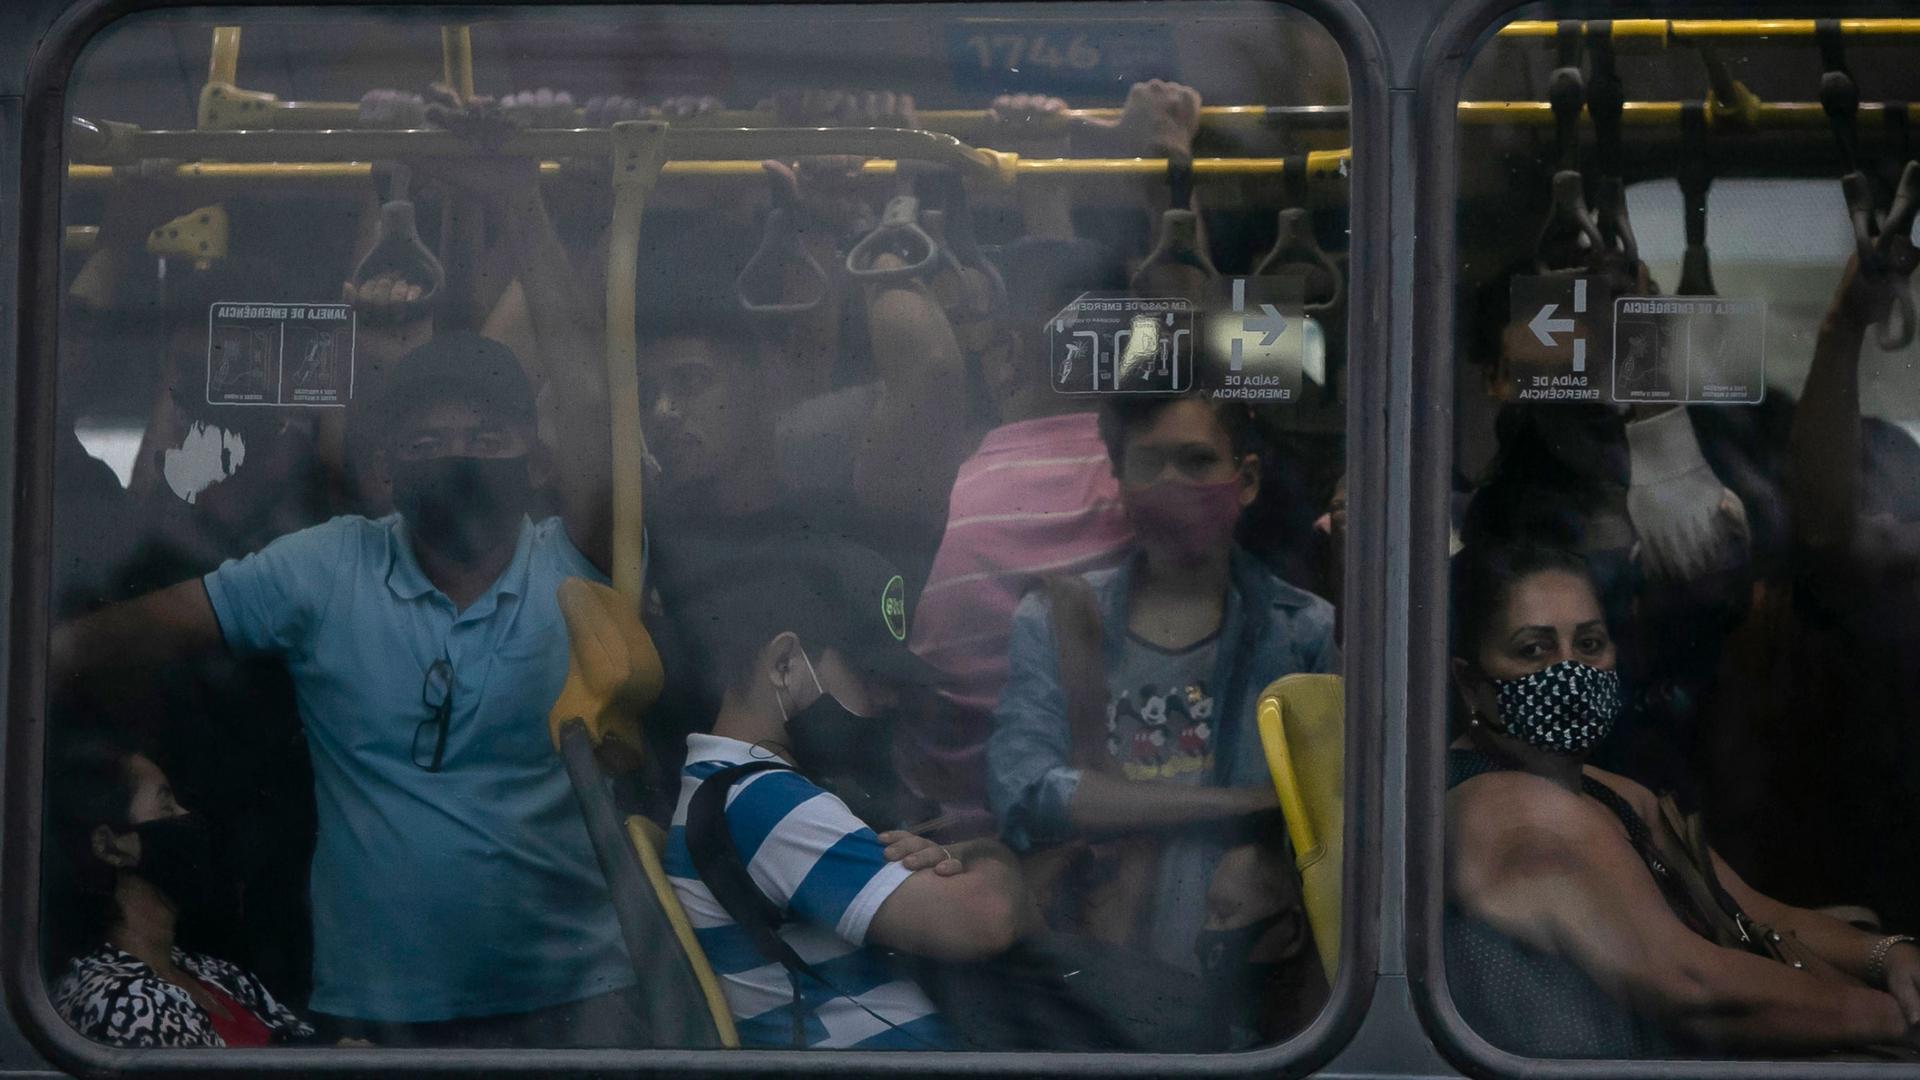 A crowd of people are shown crammed onto a bus as shown through the window.